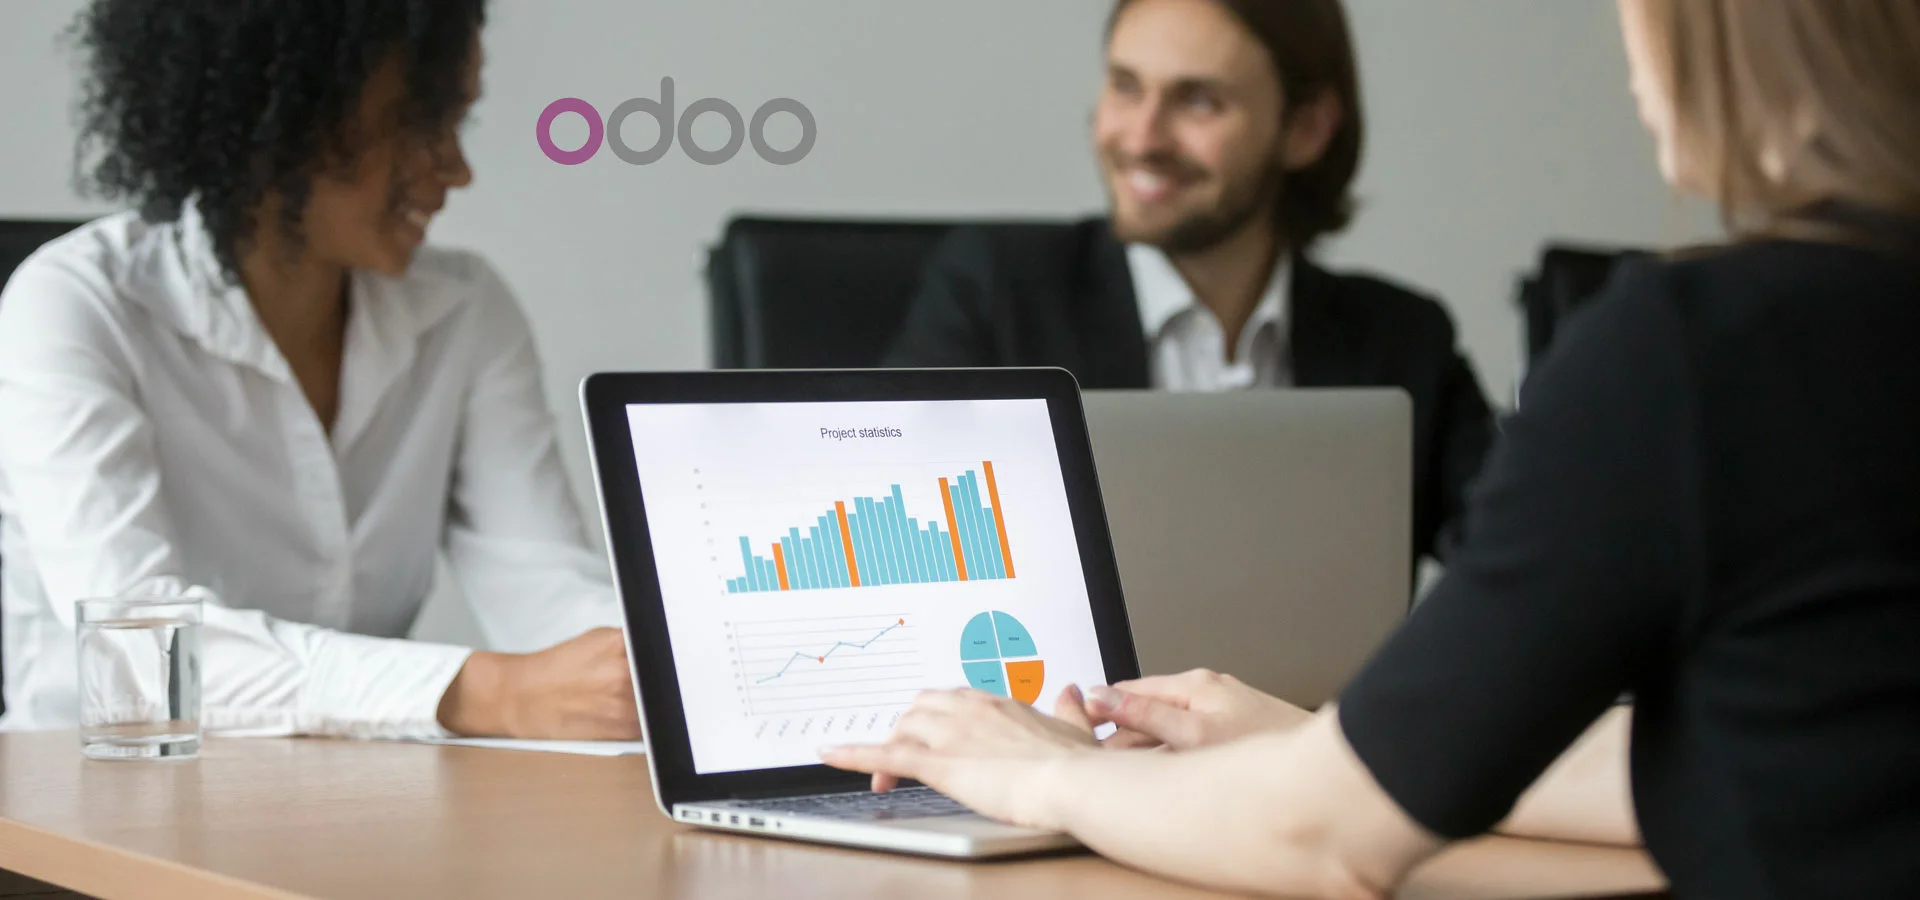 odoo-erp-support-and-services-related-blog-84